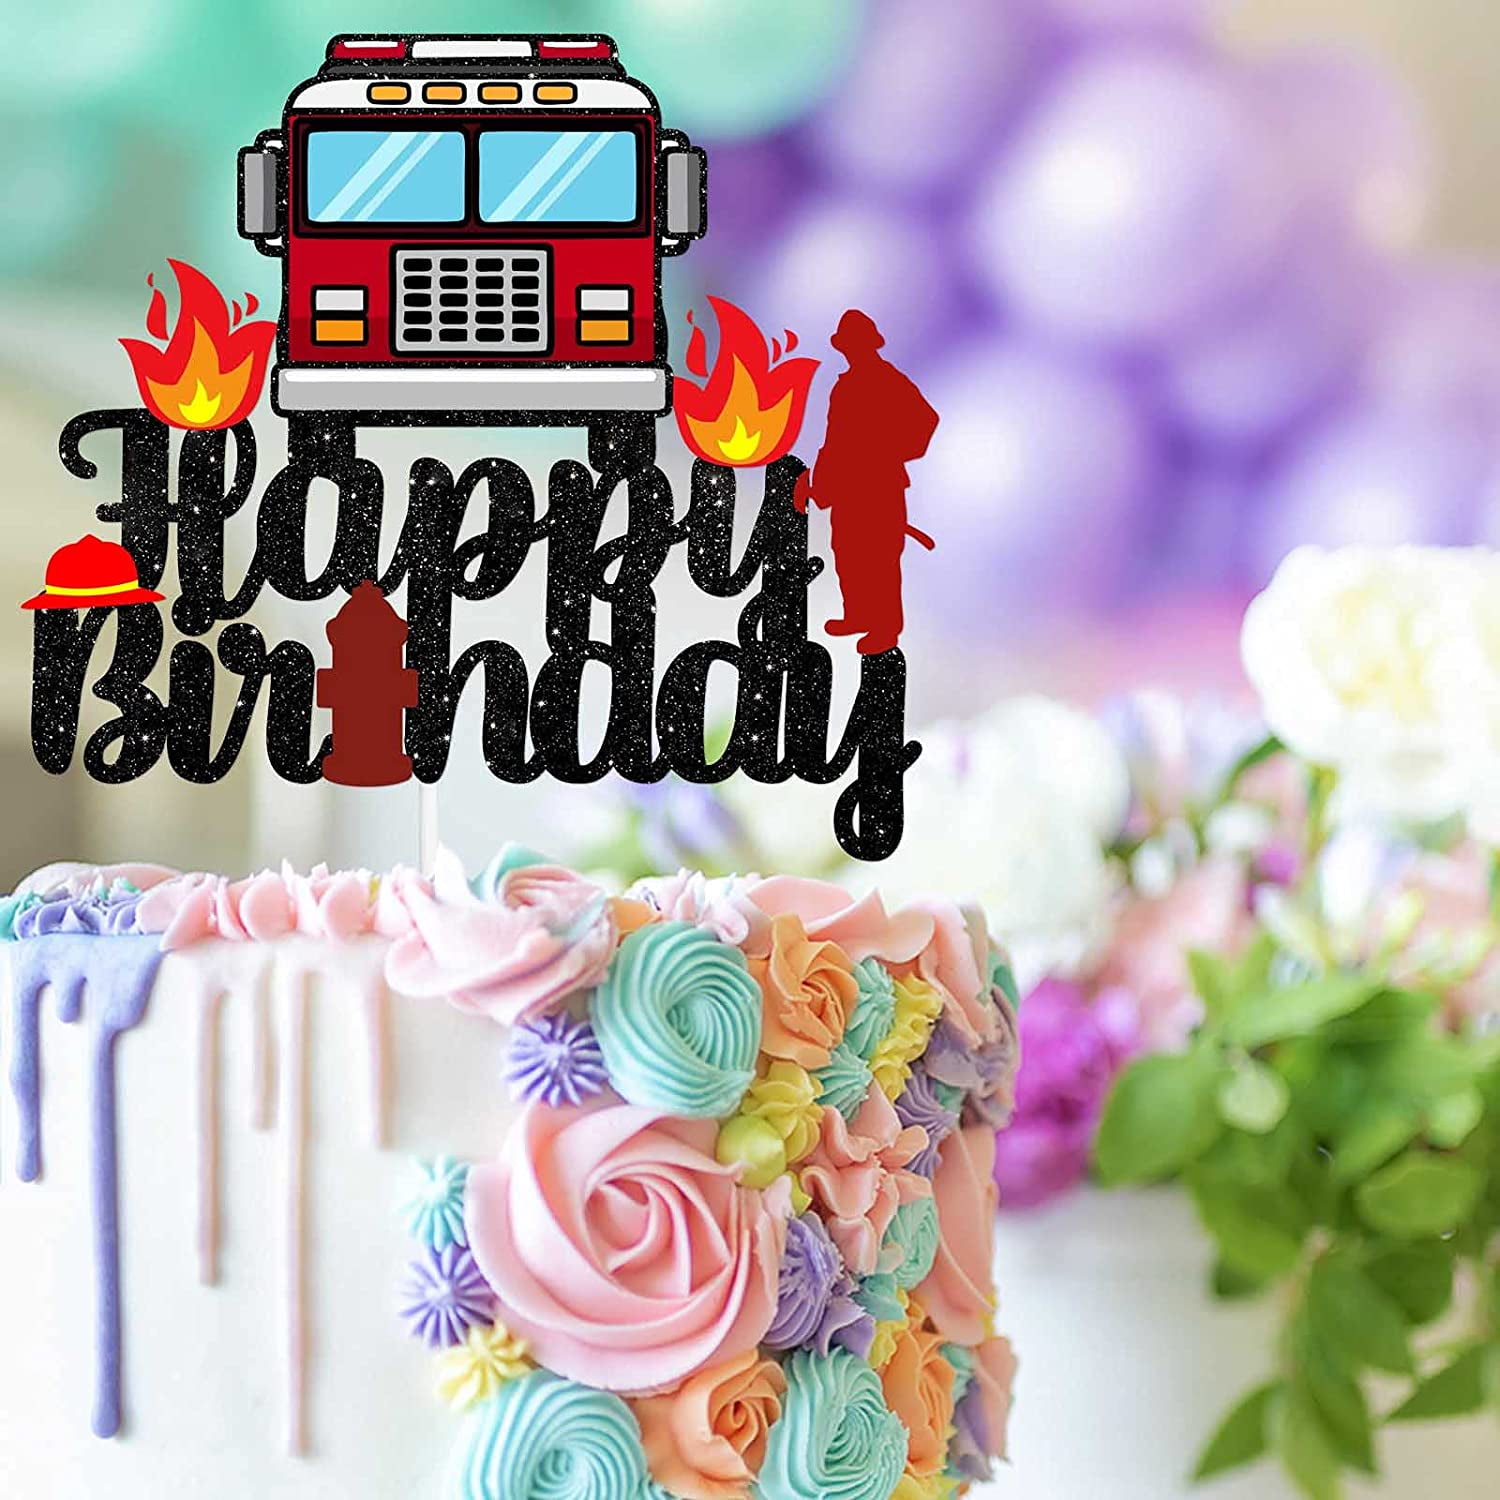 48PCS Practical Cake Decoration Use Toppers Fire Truck Firefighter Theme  Cake Toppers Fruit Picks Cake Decorating Toppers - Walmart.com